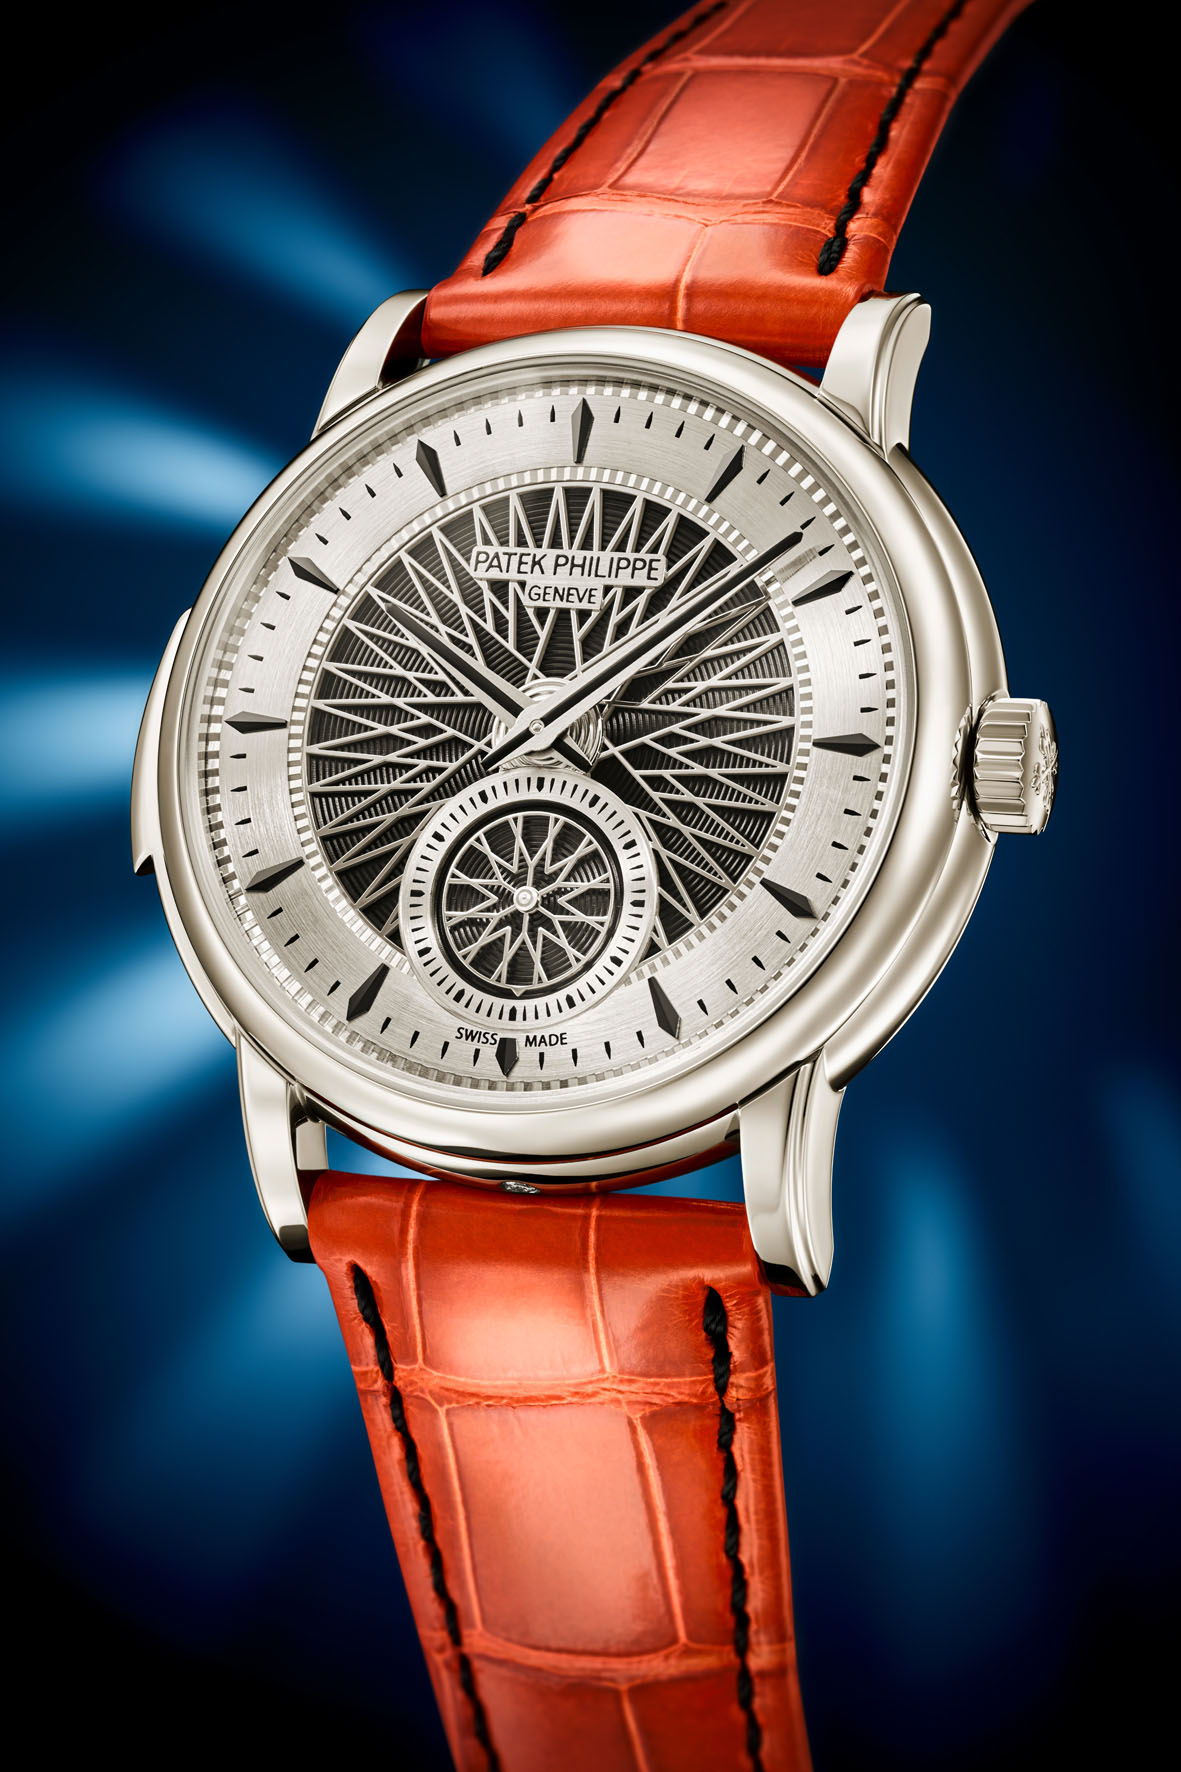 Patek Philippe: Advanced Research 5750 Minute Repeater | Watchinsanity